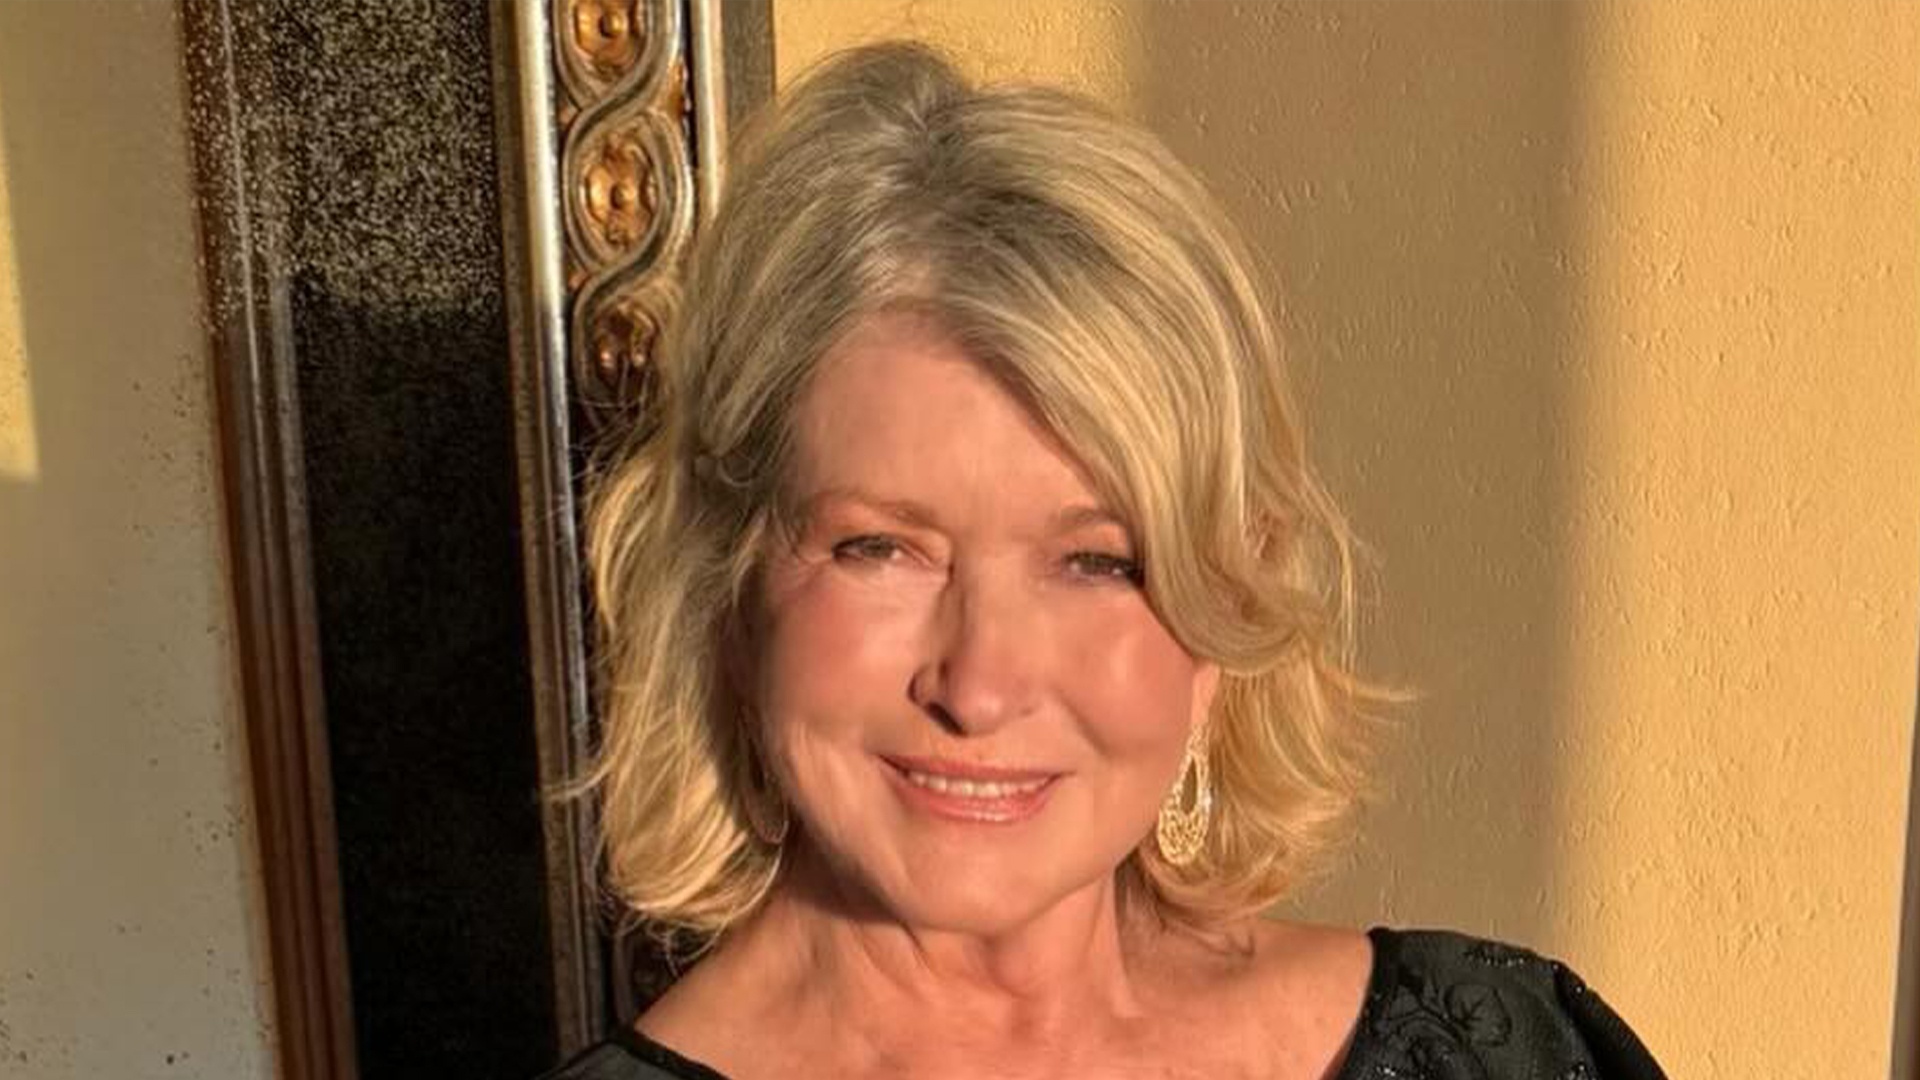 Martha Stewart Stuns at 82, Flaunting Slim Figure and $330 Necklace – Fans in Awe at Dallas Event